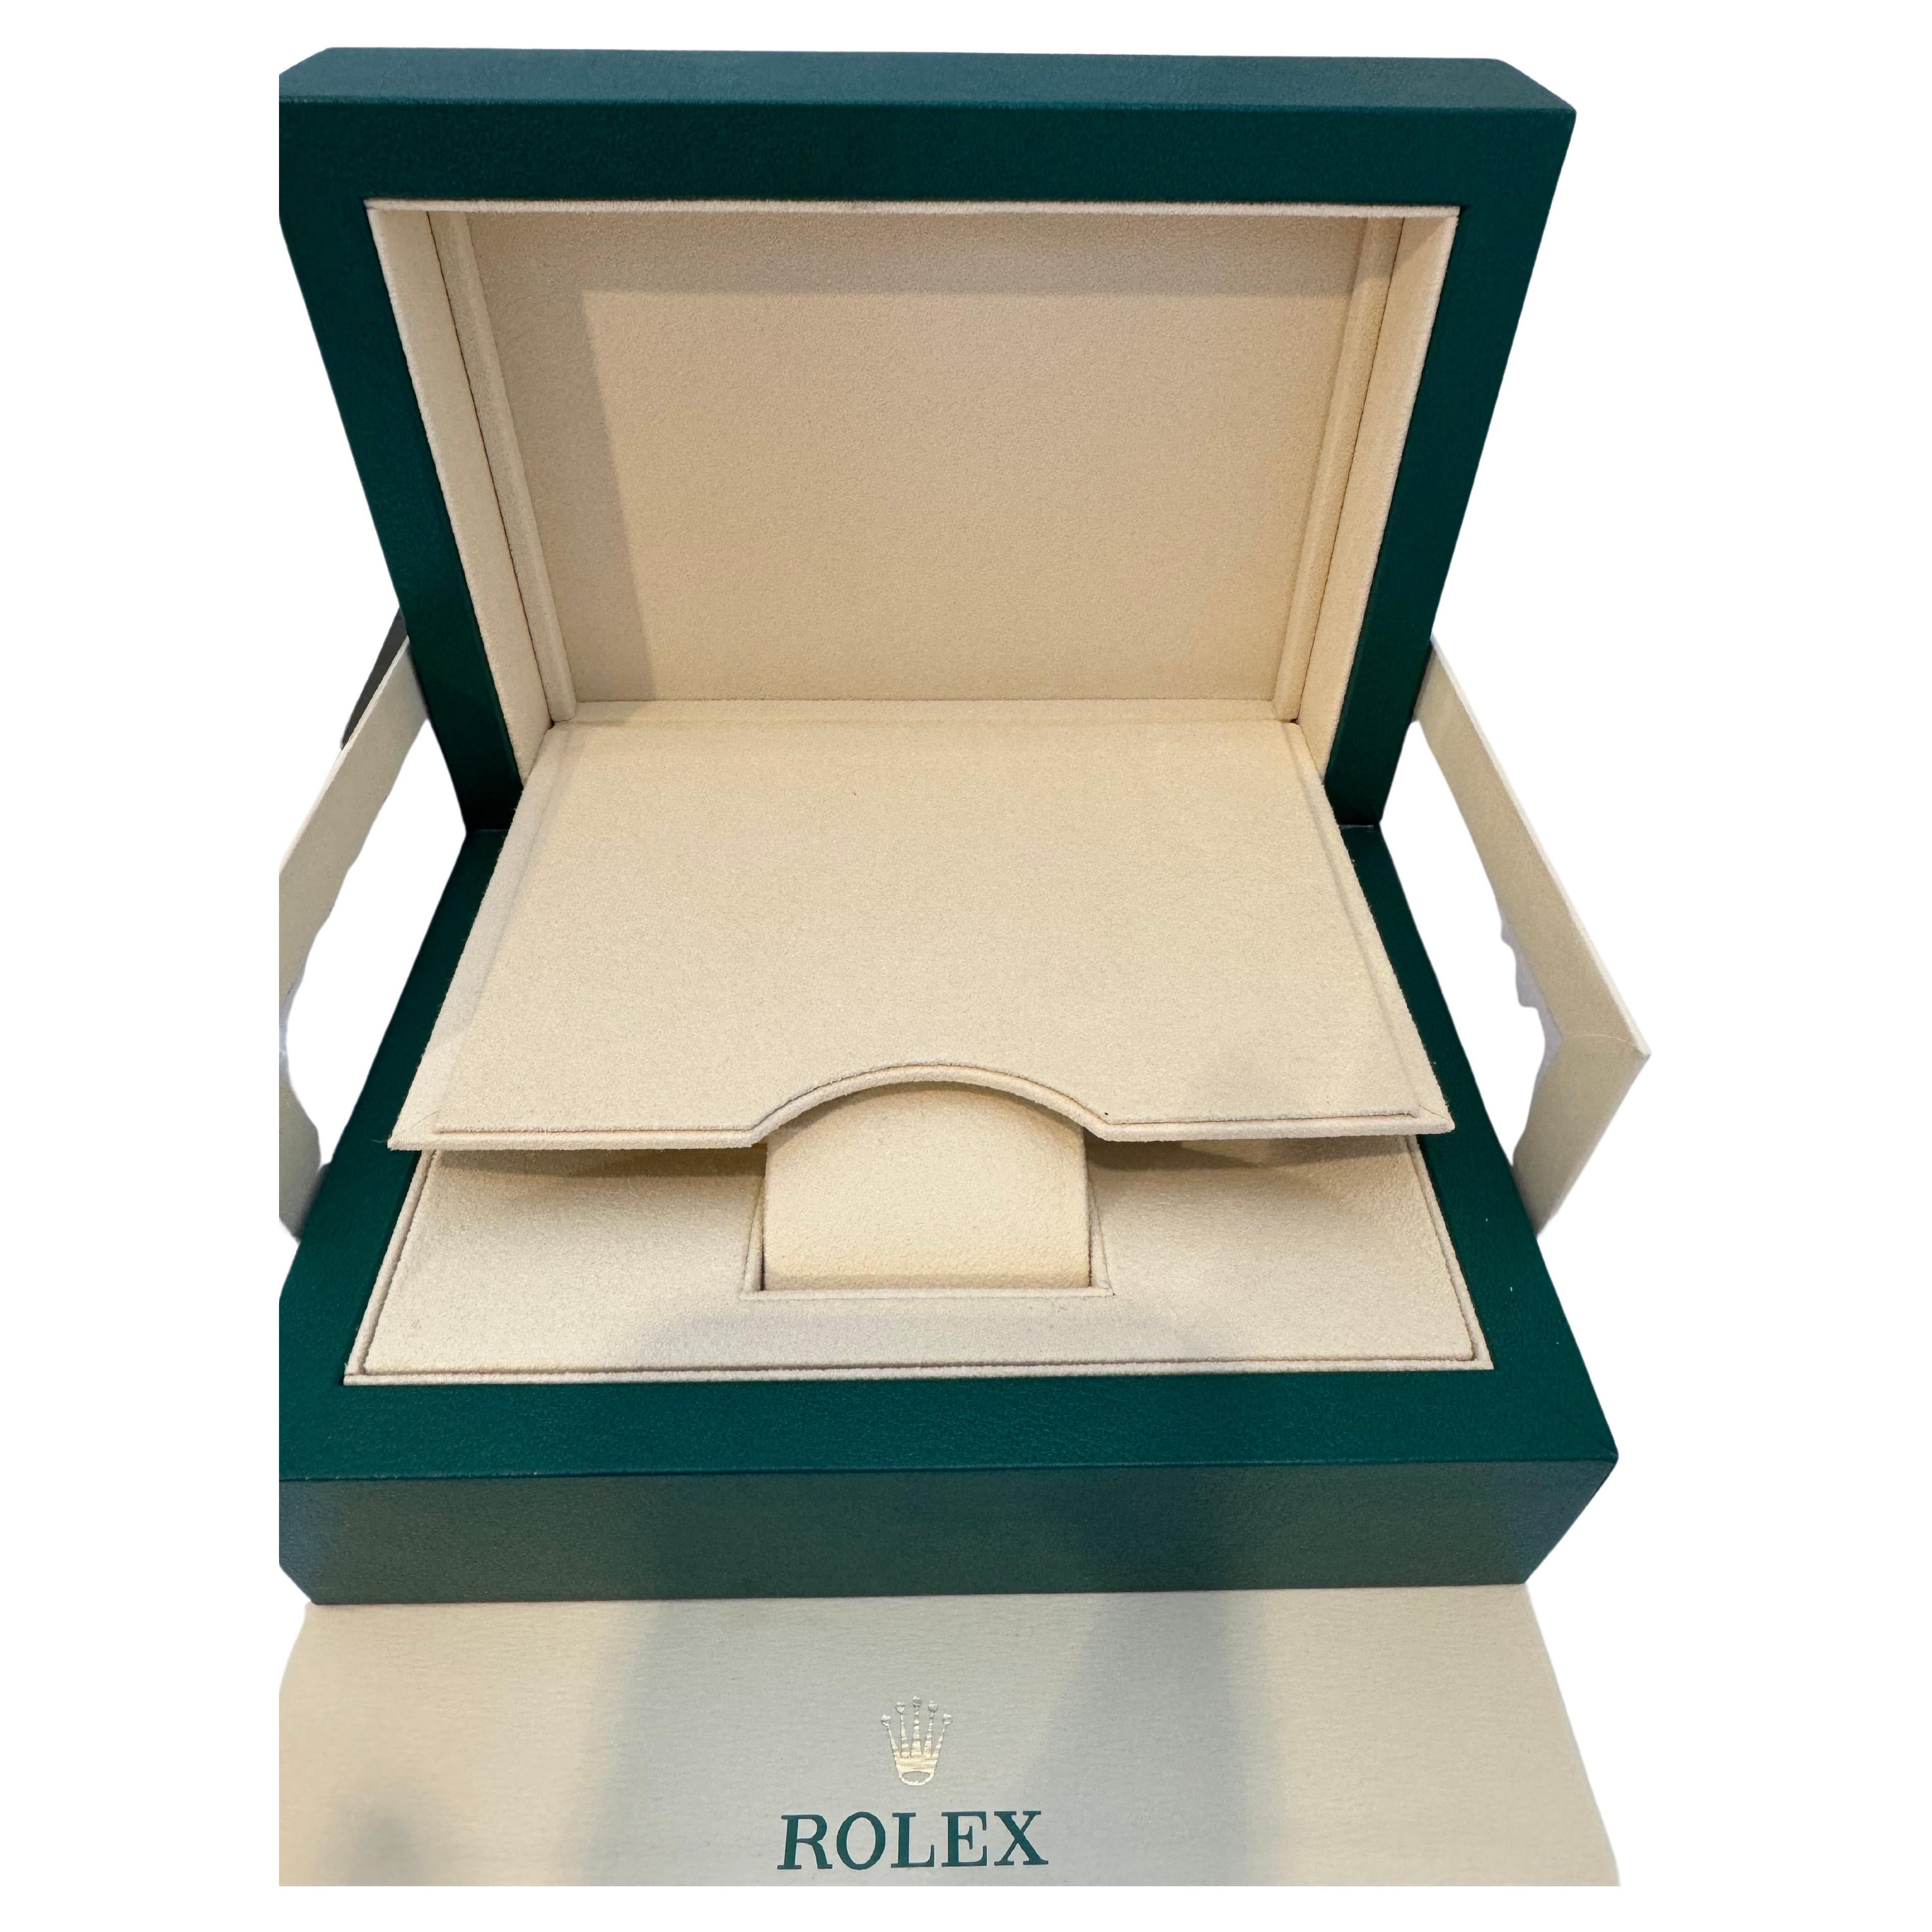 Brand New Watch BOX 
 Rolex was  purchased from show room in Manhattan 
 Watch was used for personal use and i am selling the box

Large Brand New Rolex Box
Complete and new Rolex box.
Ref ROL0117964
R58F4827
M216570-0002
14892020
Large size